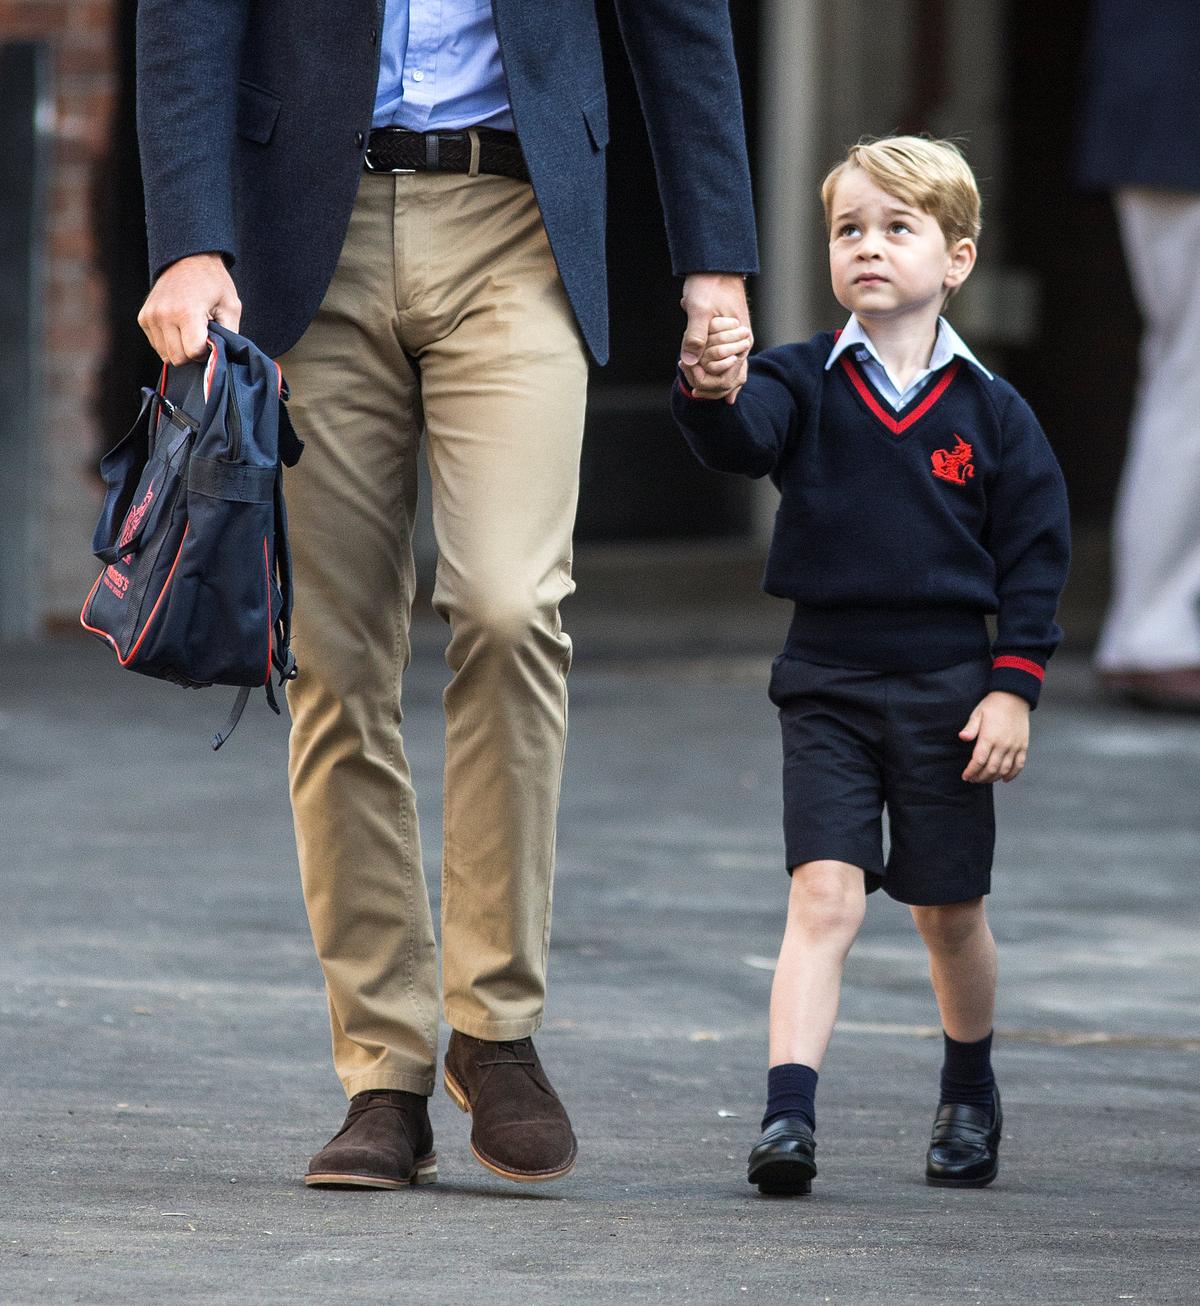 Prince George holds his father Britain's Prince William's hand as he arrives on his first day of school at Thomas's school in Battersea, London on Sept. 7, 2017. (REUTERS/Richard Pohle/Pool)